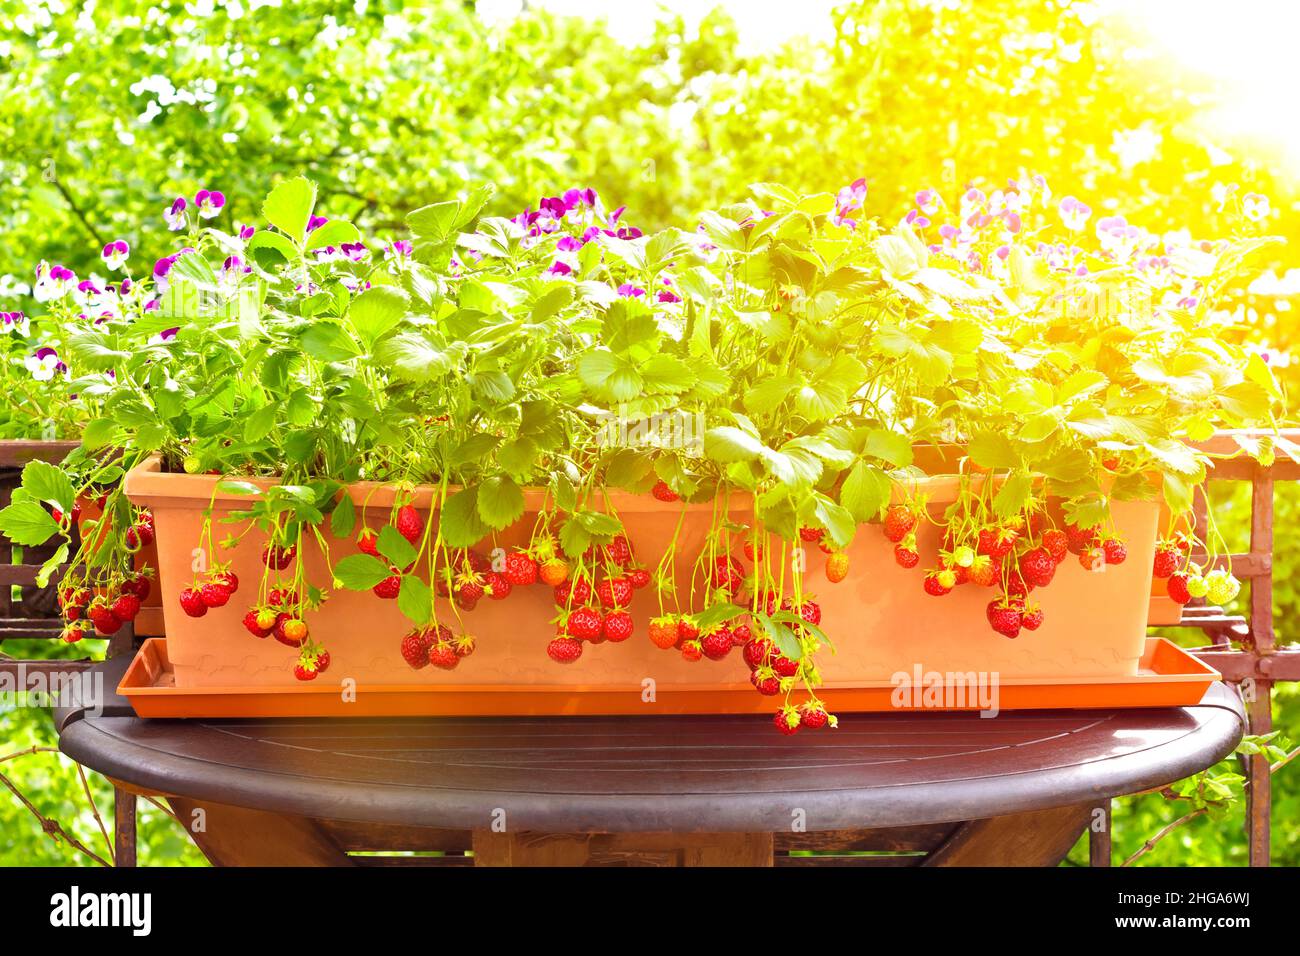 Lots of ripe red strawberries in a planter box on a balcony table, pansies in the background, apartment or container gardening concept. Stock Photo